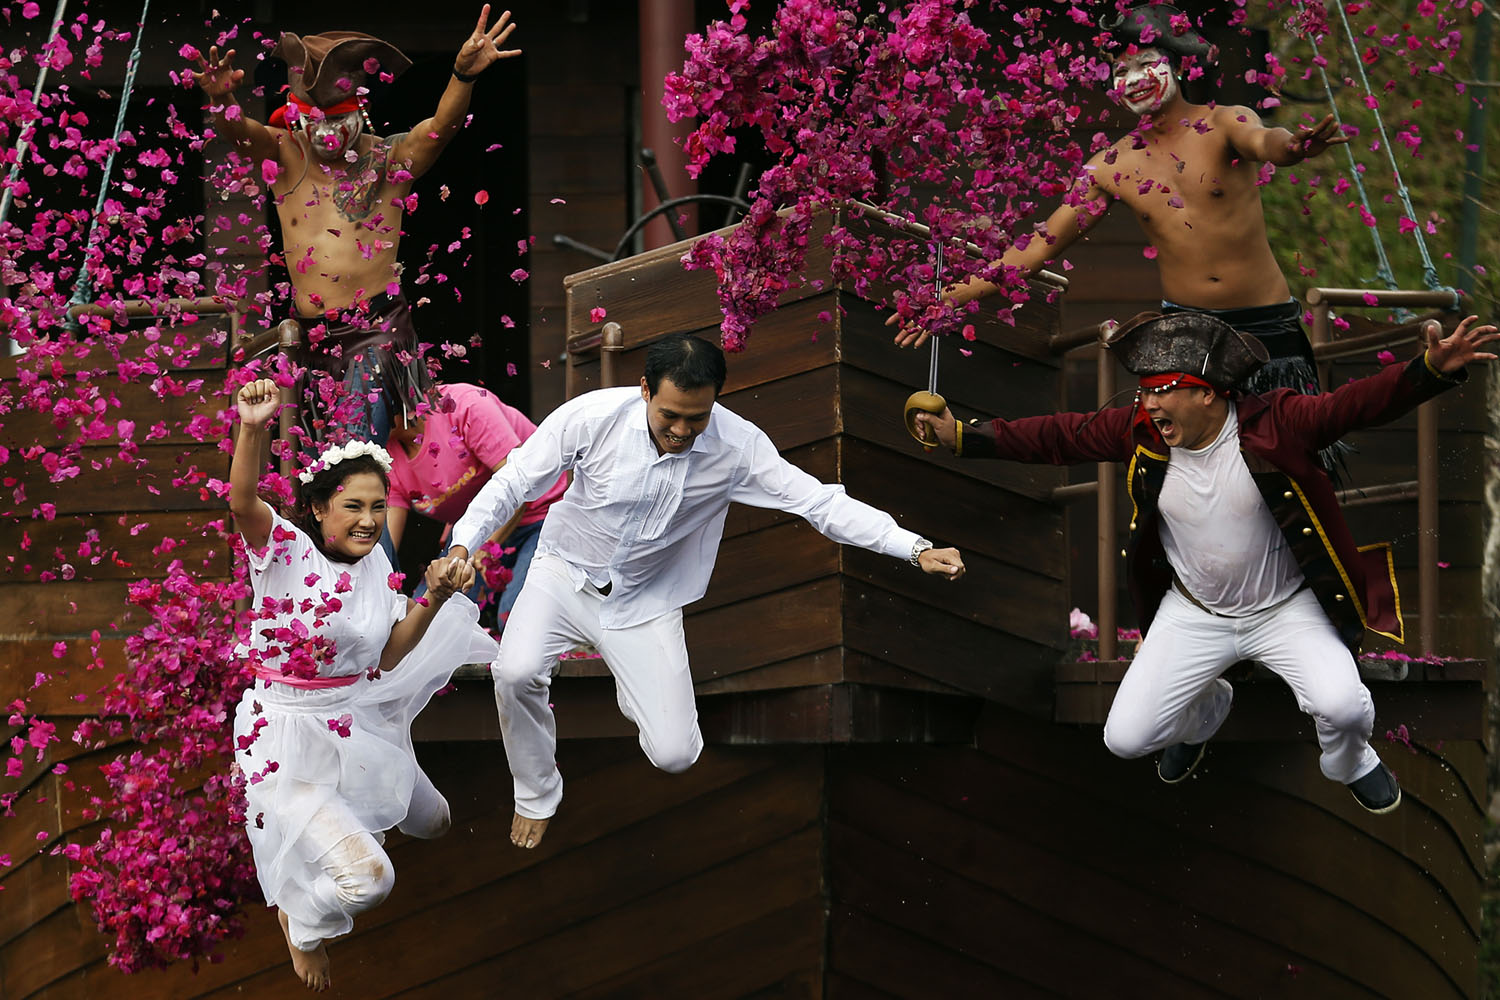 Groom and bride jump into the pond as they are chased by men dressed as pirates in Prachin Buri province